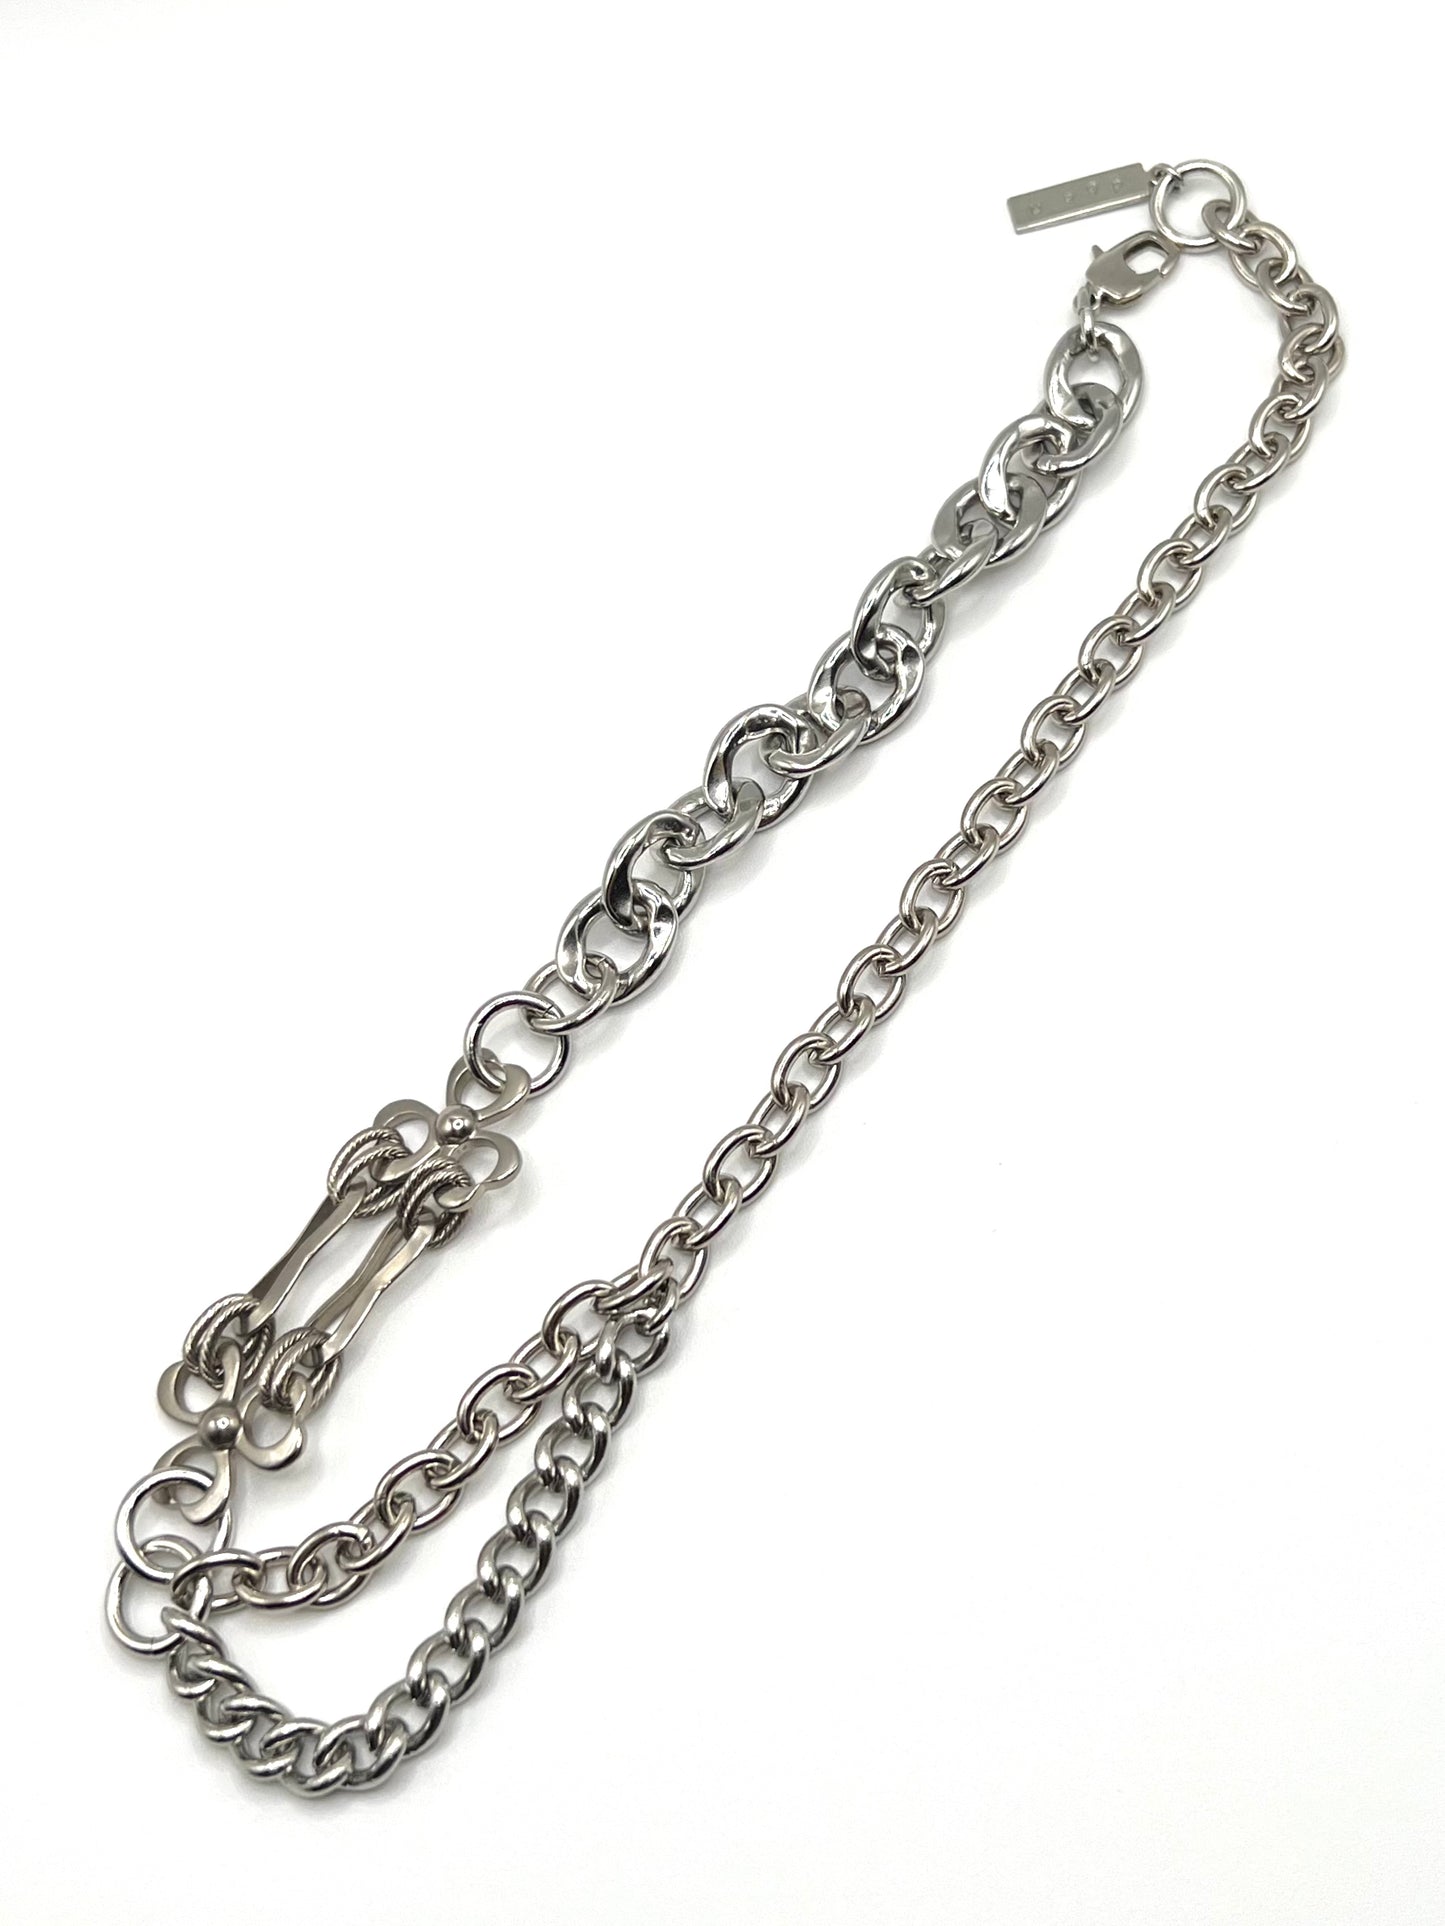 Chain combination necklace - B